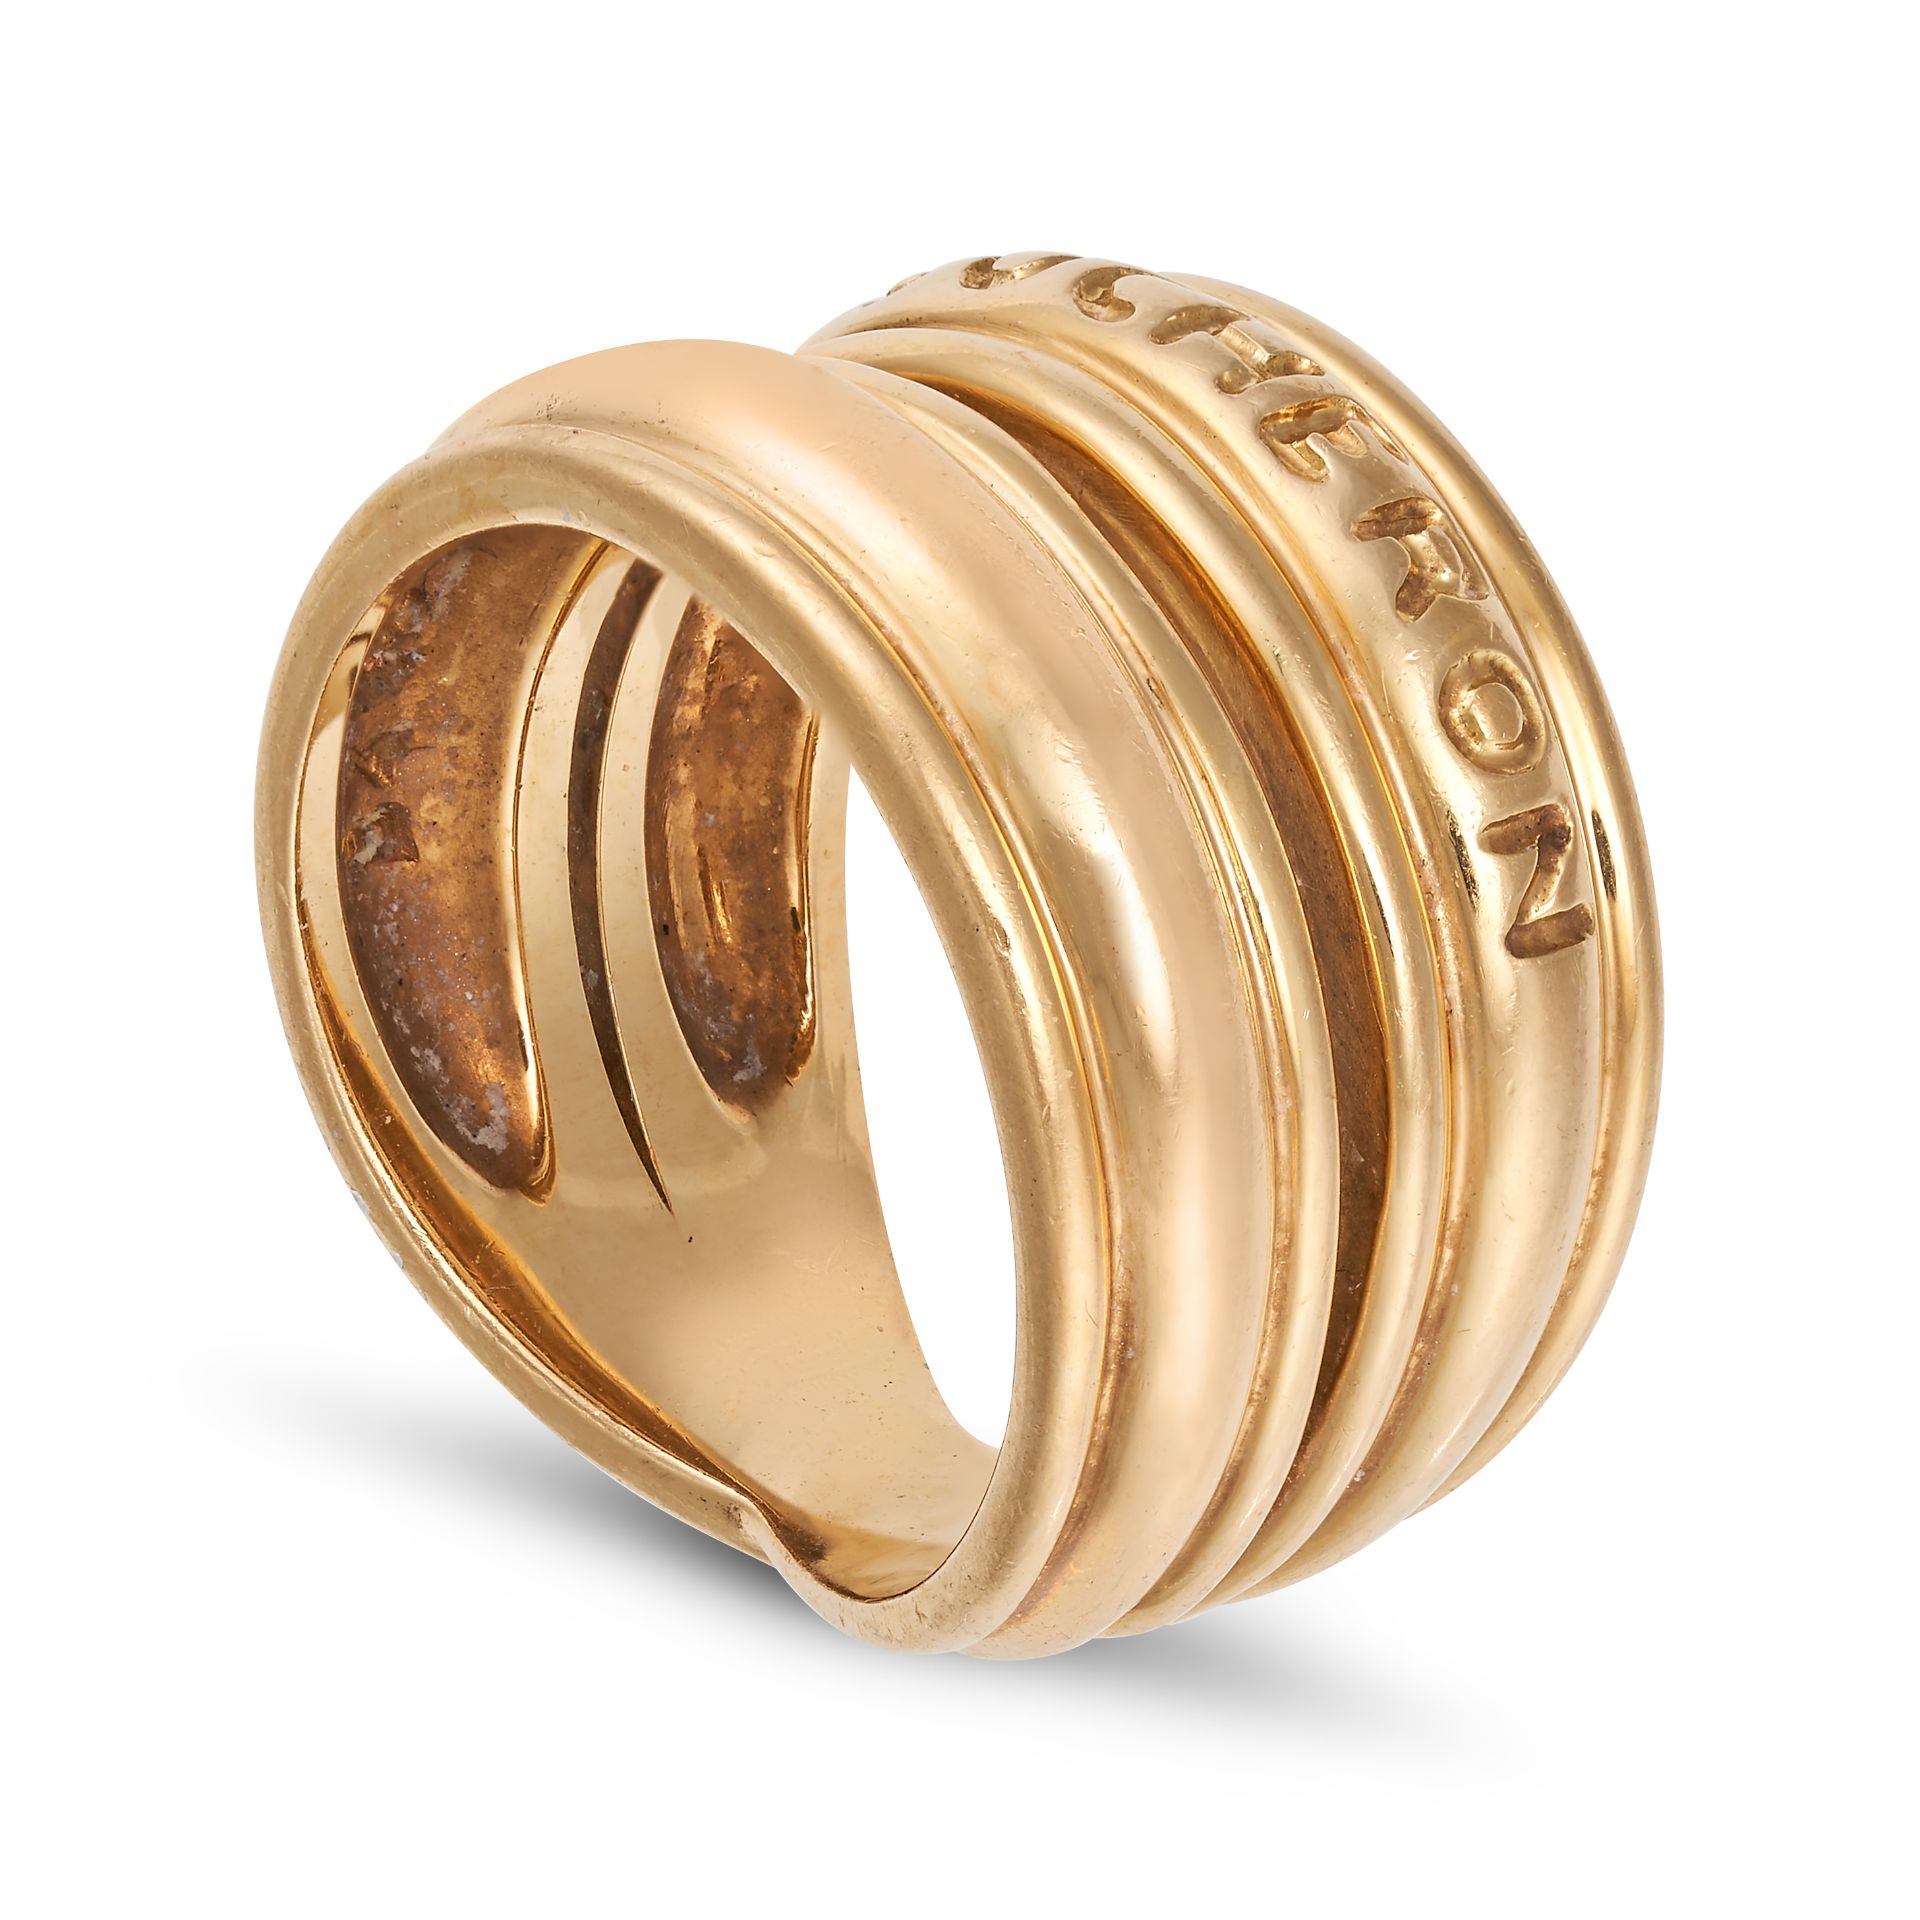 BOUCHERON, A GOLD DRESS RING in 18ct yellow gold, the stylised double band crossing over at the b... - Image 2 of 2